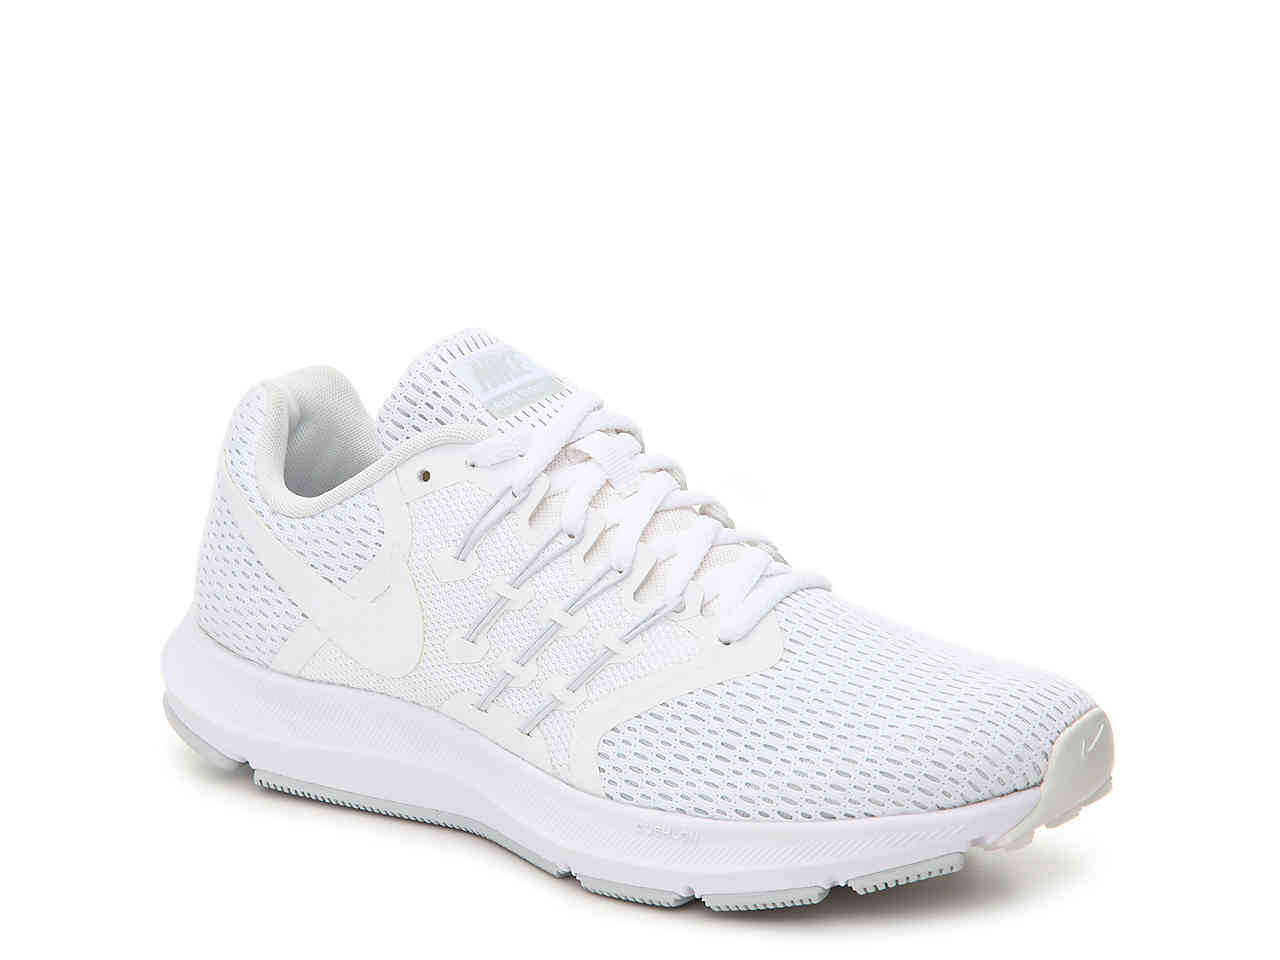 Womens Nike running shoes – Some Best Running Shoes in the Market